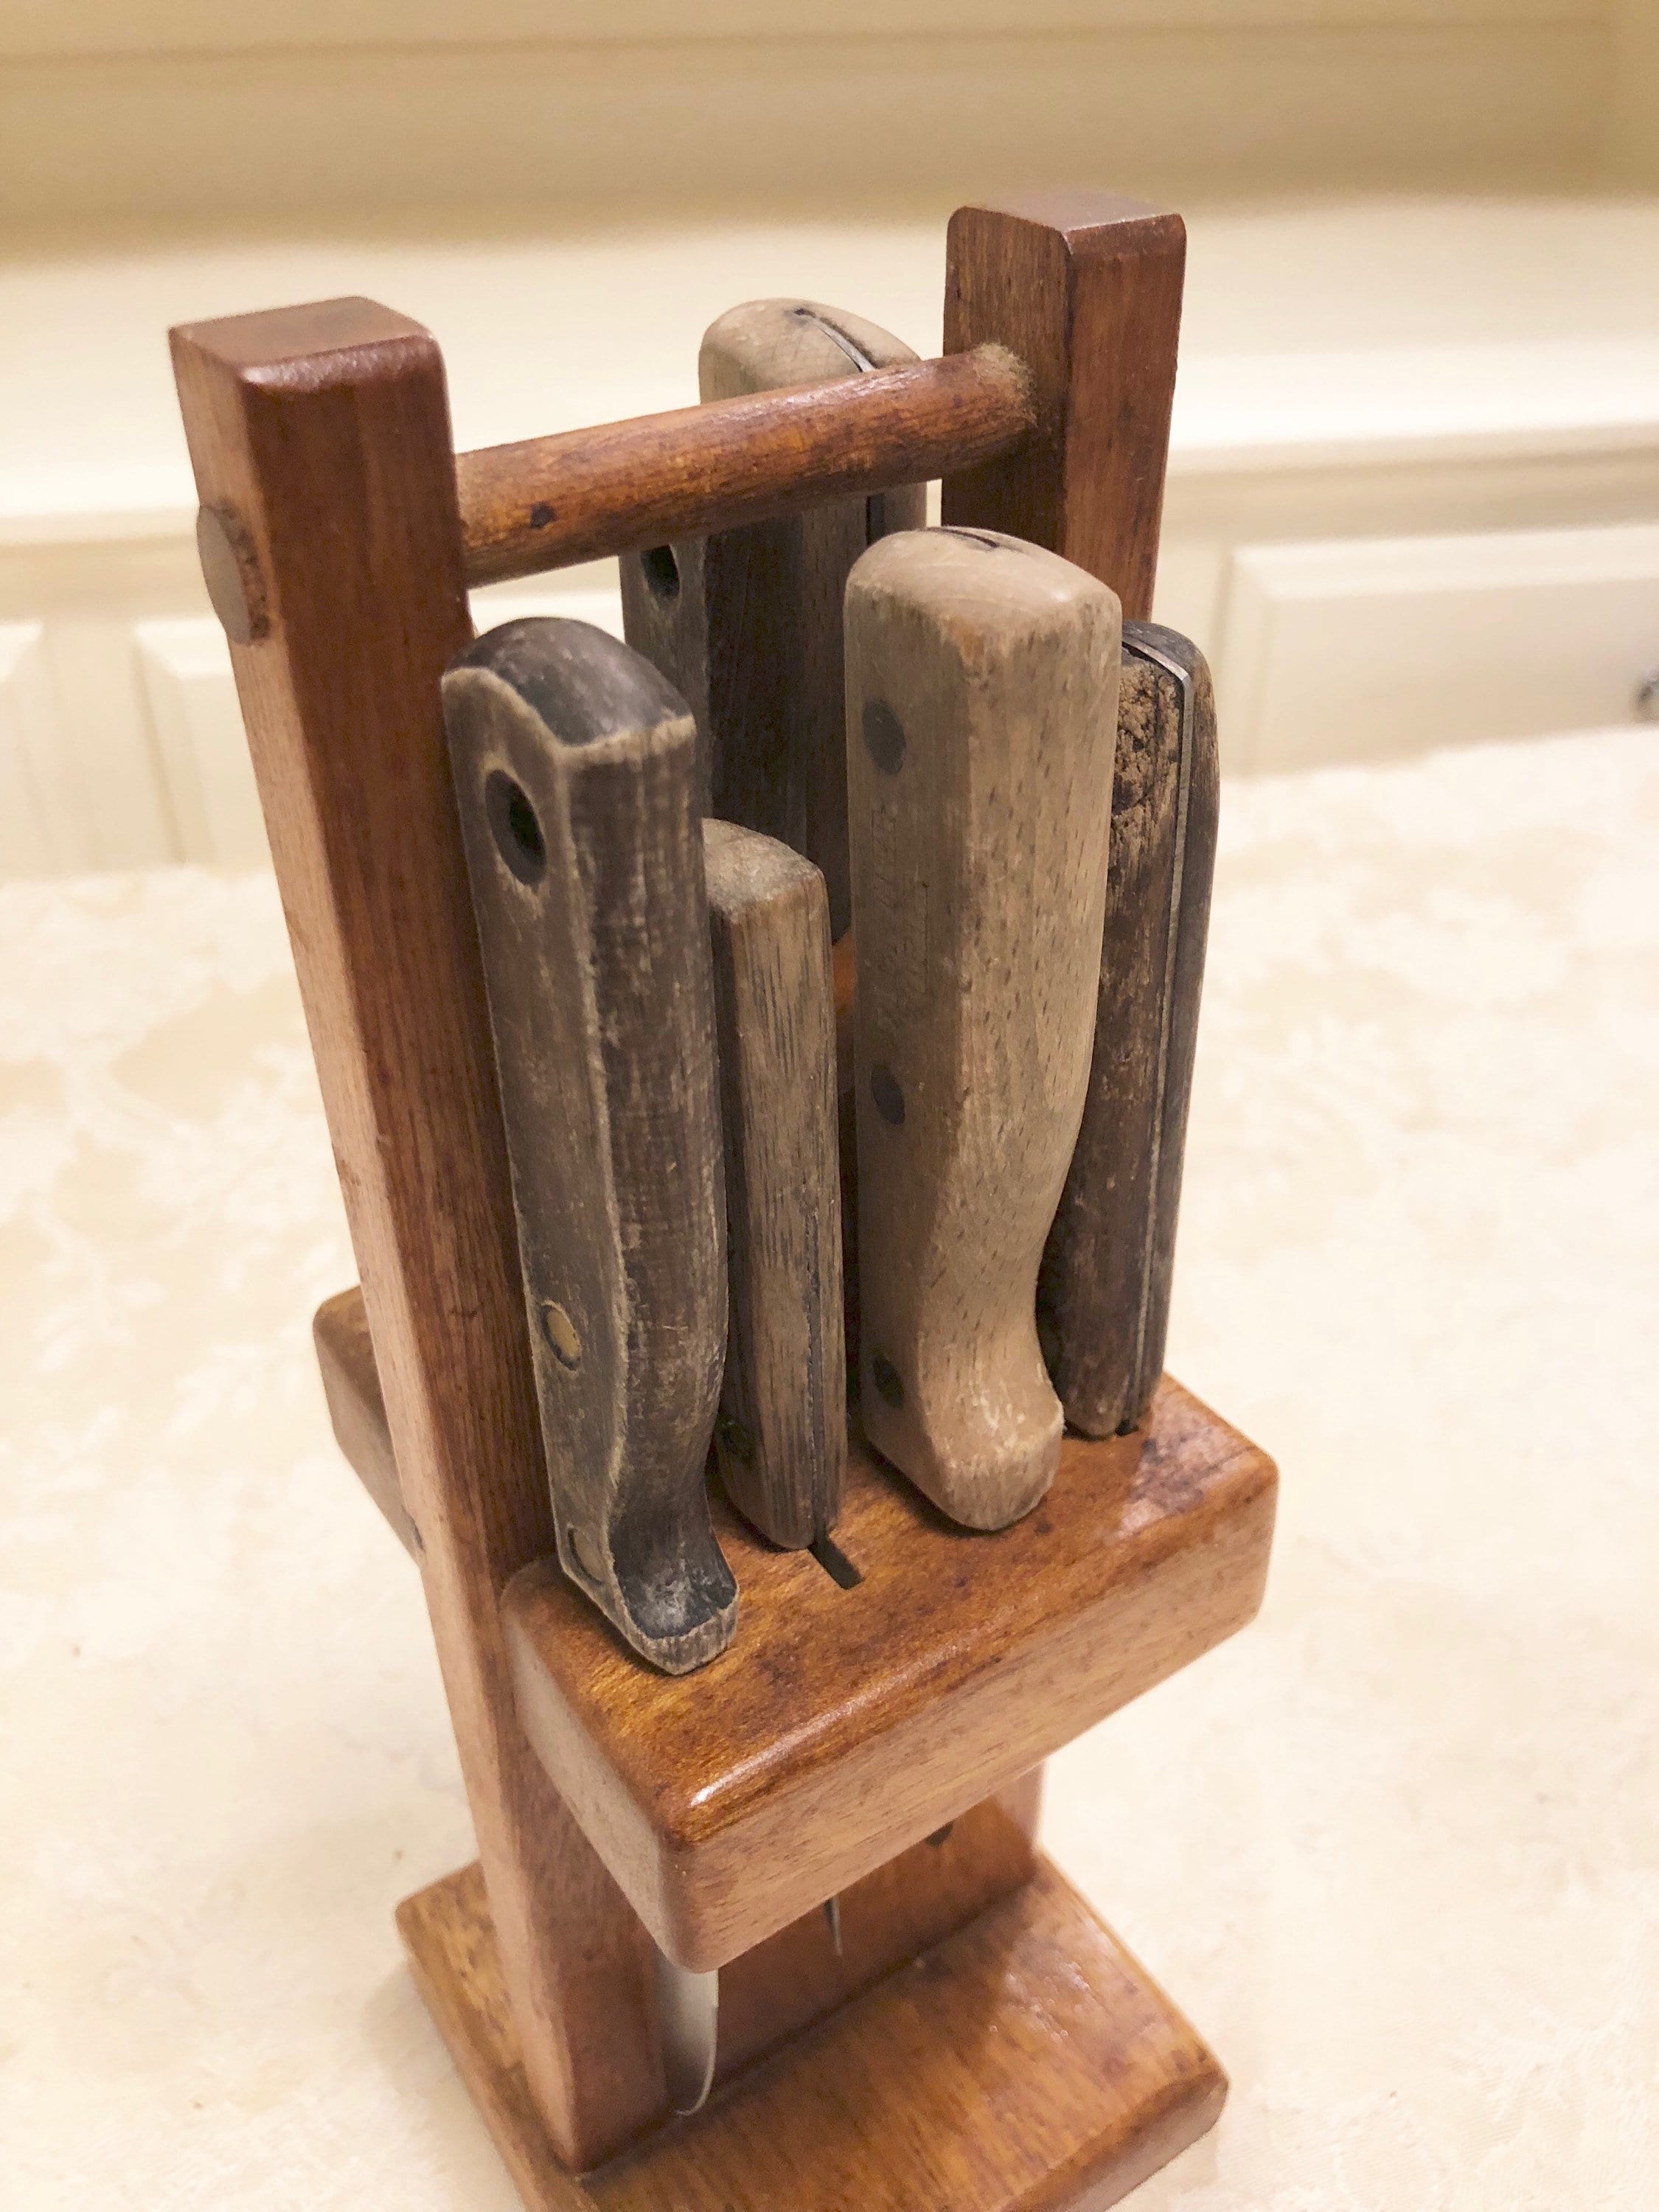 Distressed Knife Block With 8 Ornate Steak Knifes Included